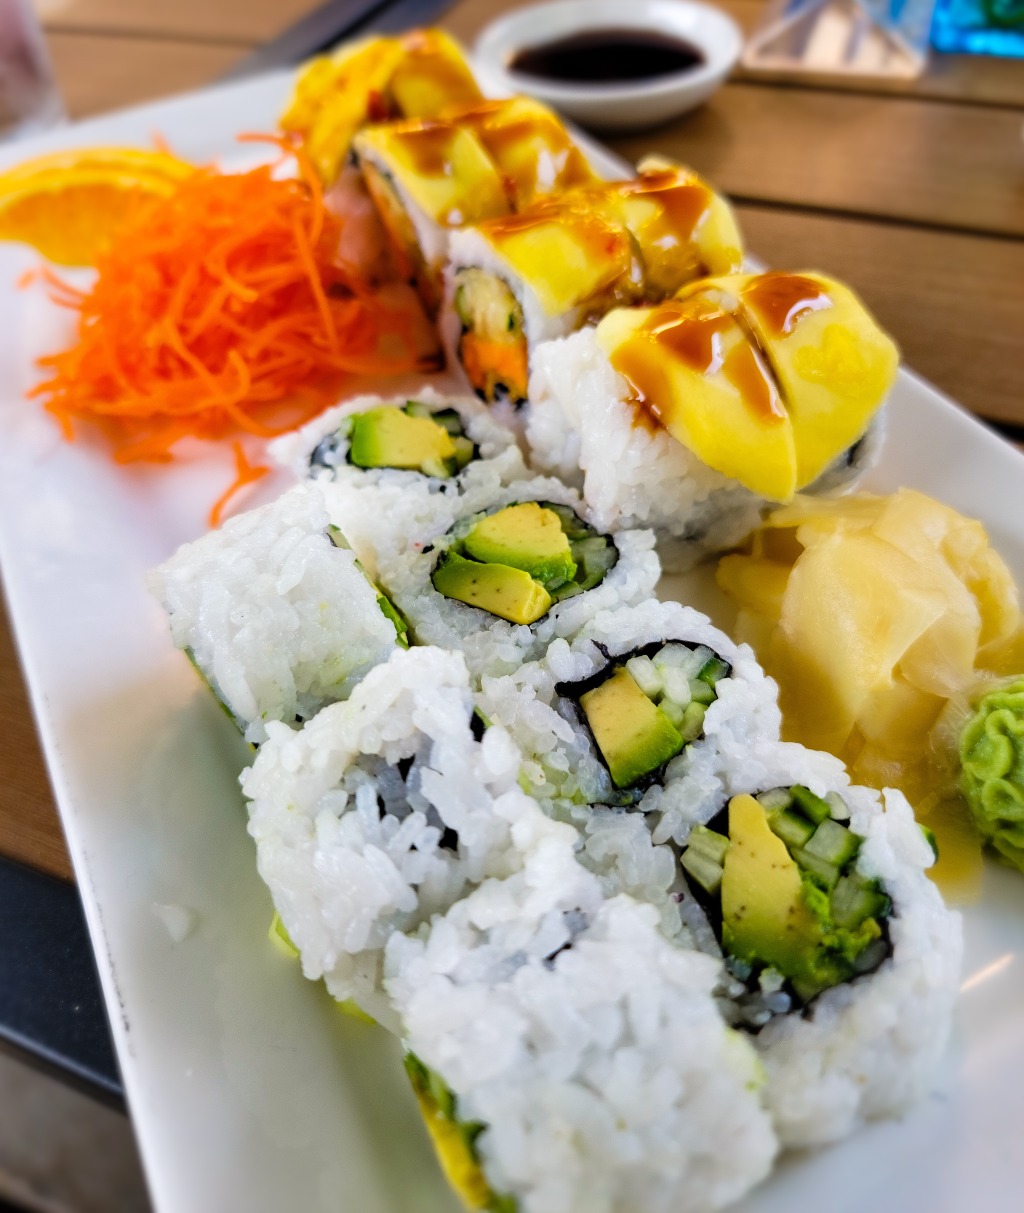 Sushi One: A Taste of East Asia in Raleigh, NC